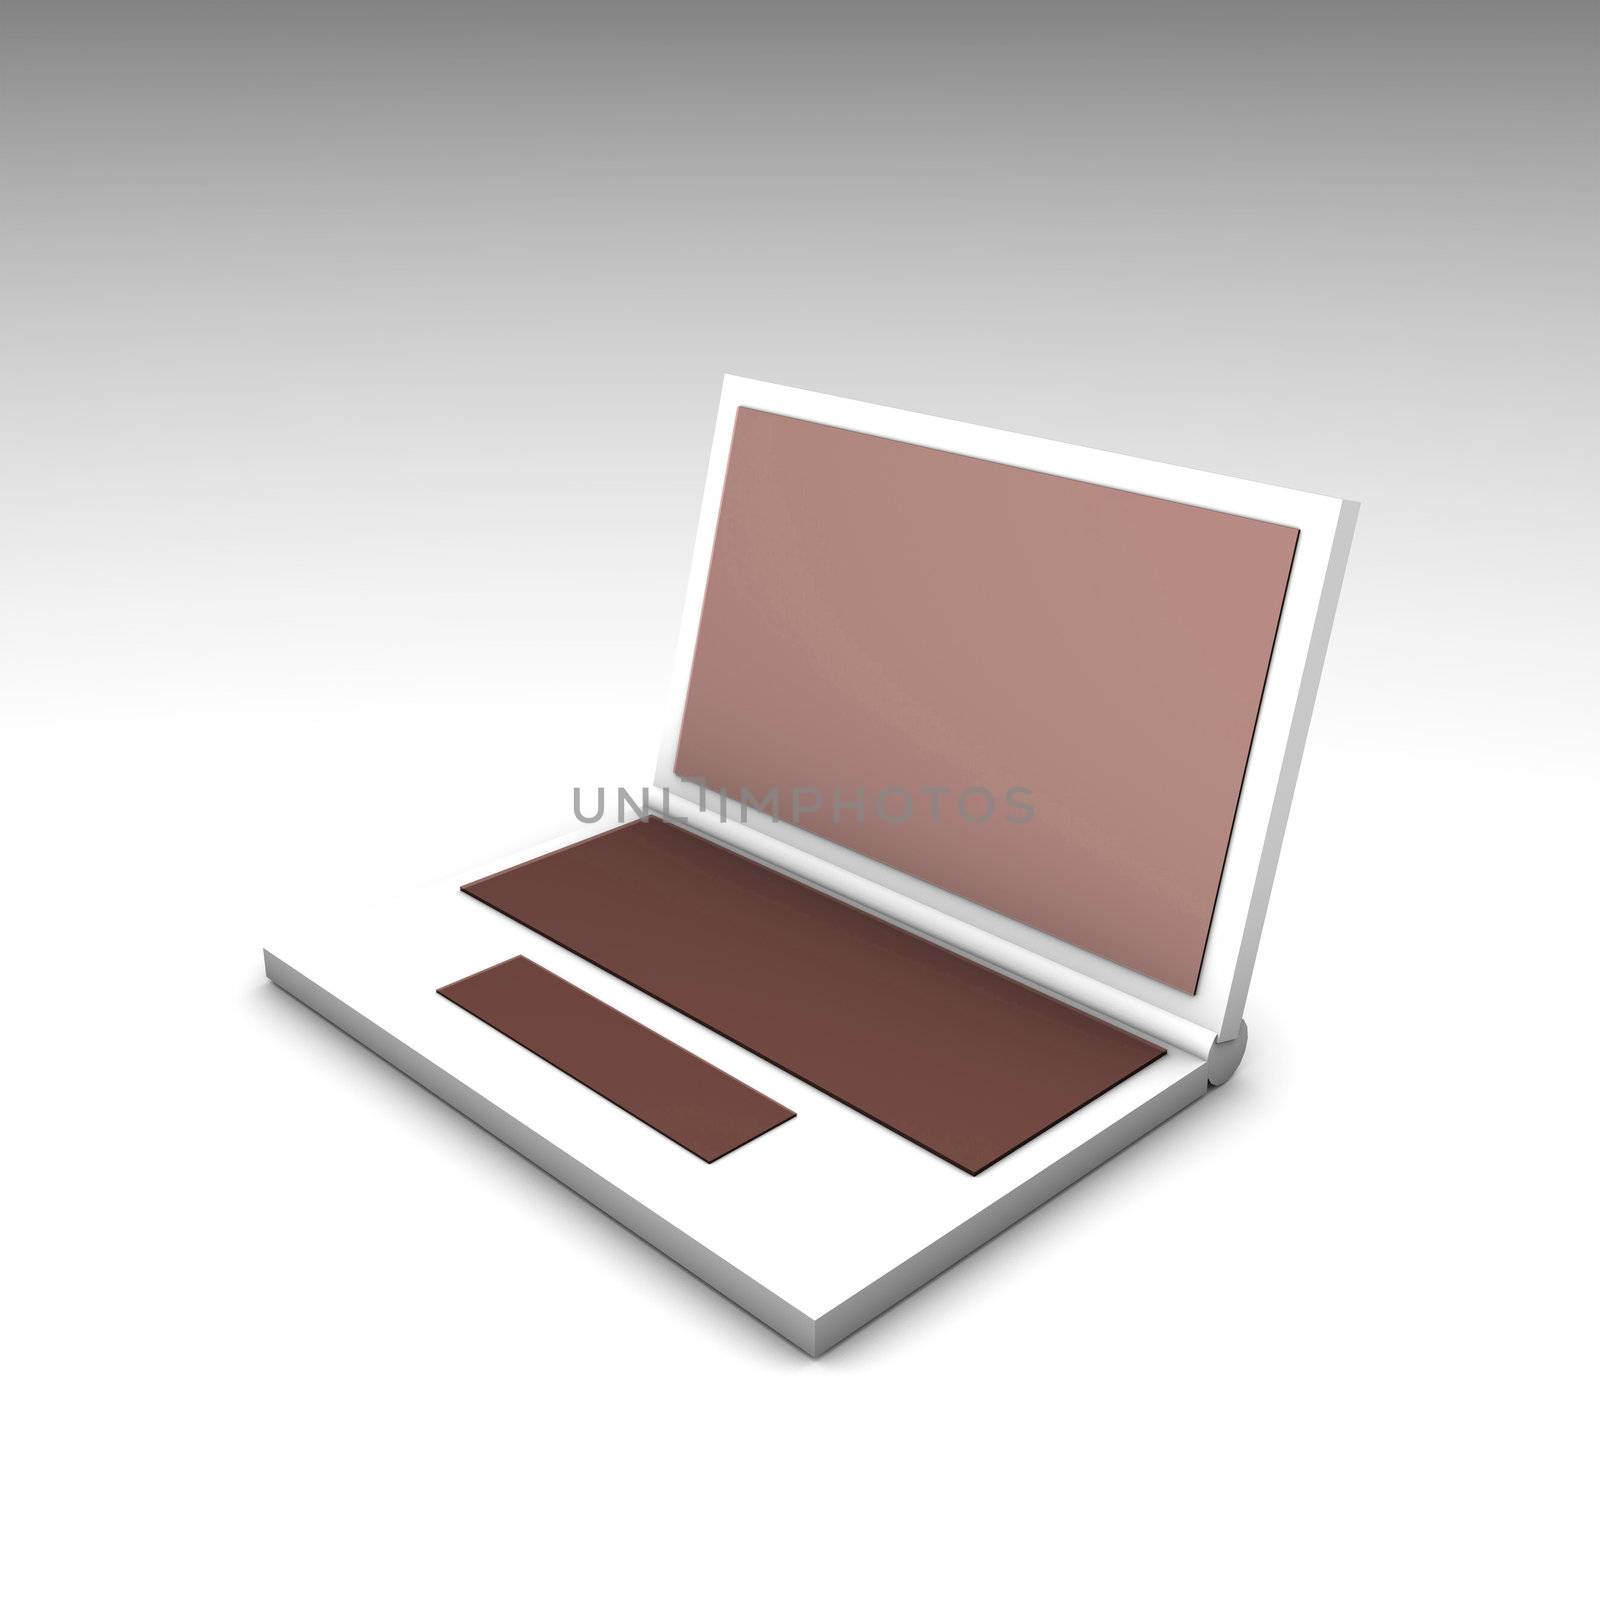 Red White Netbook Computer Laptop in 3d